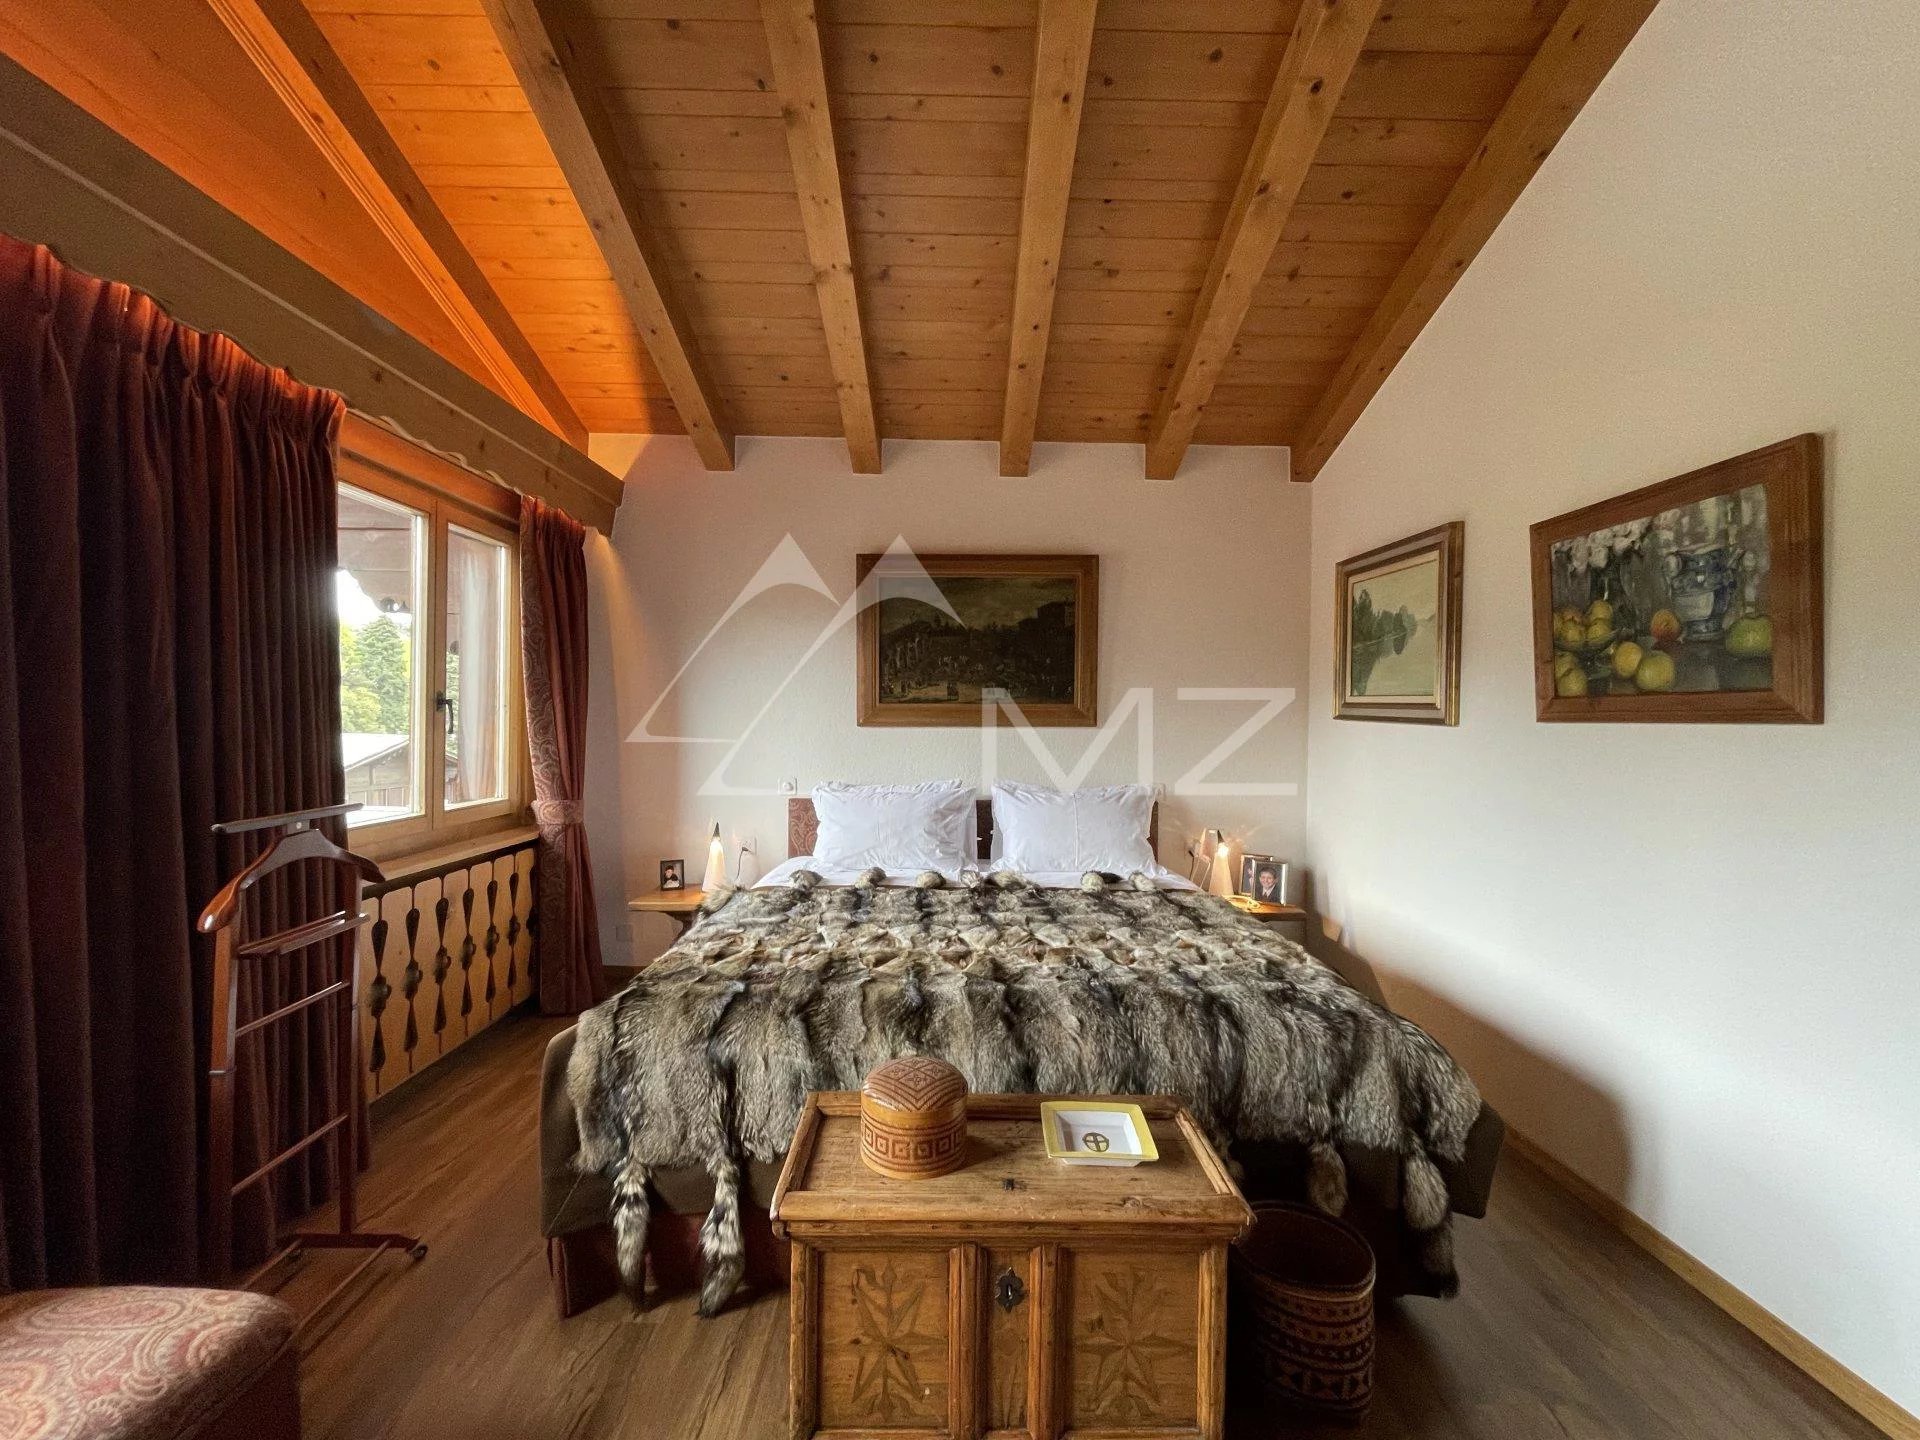 Top floor apartment in the center of Gstaad